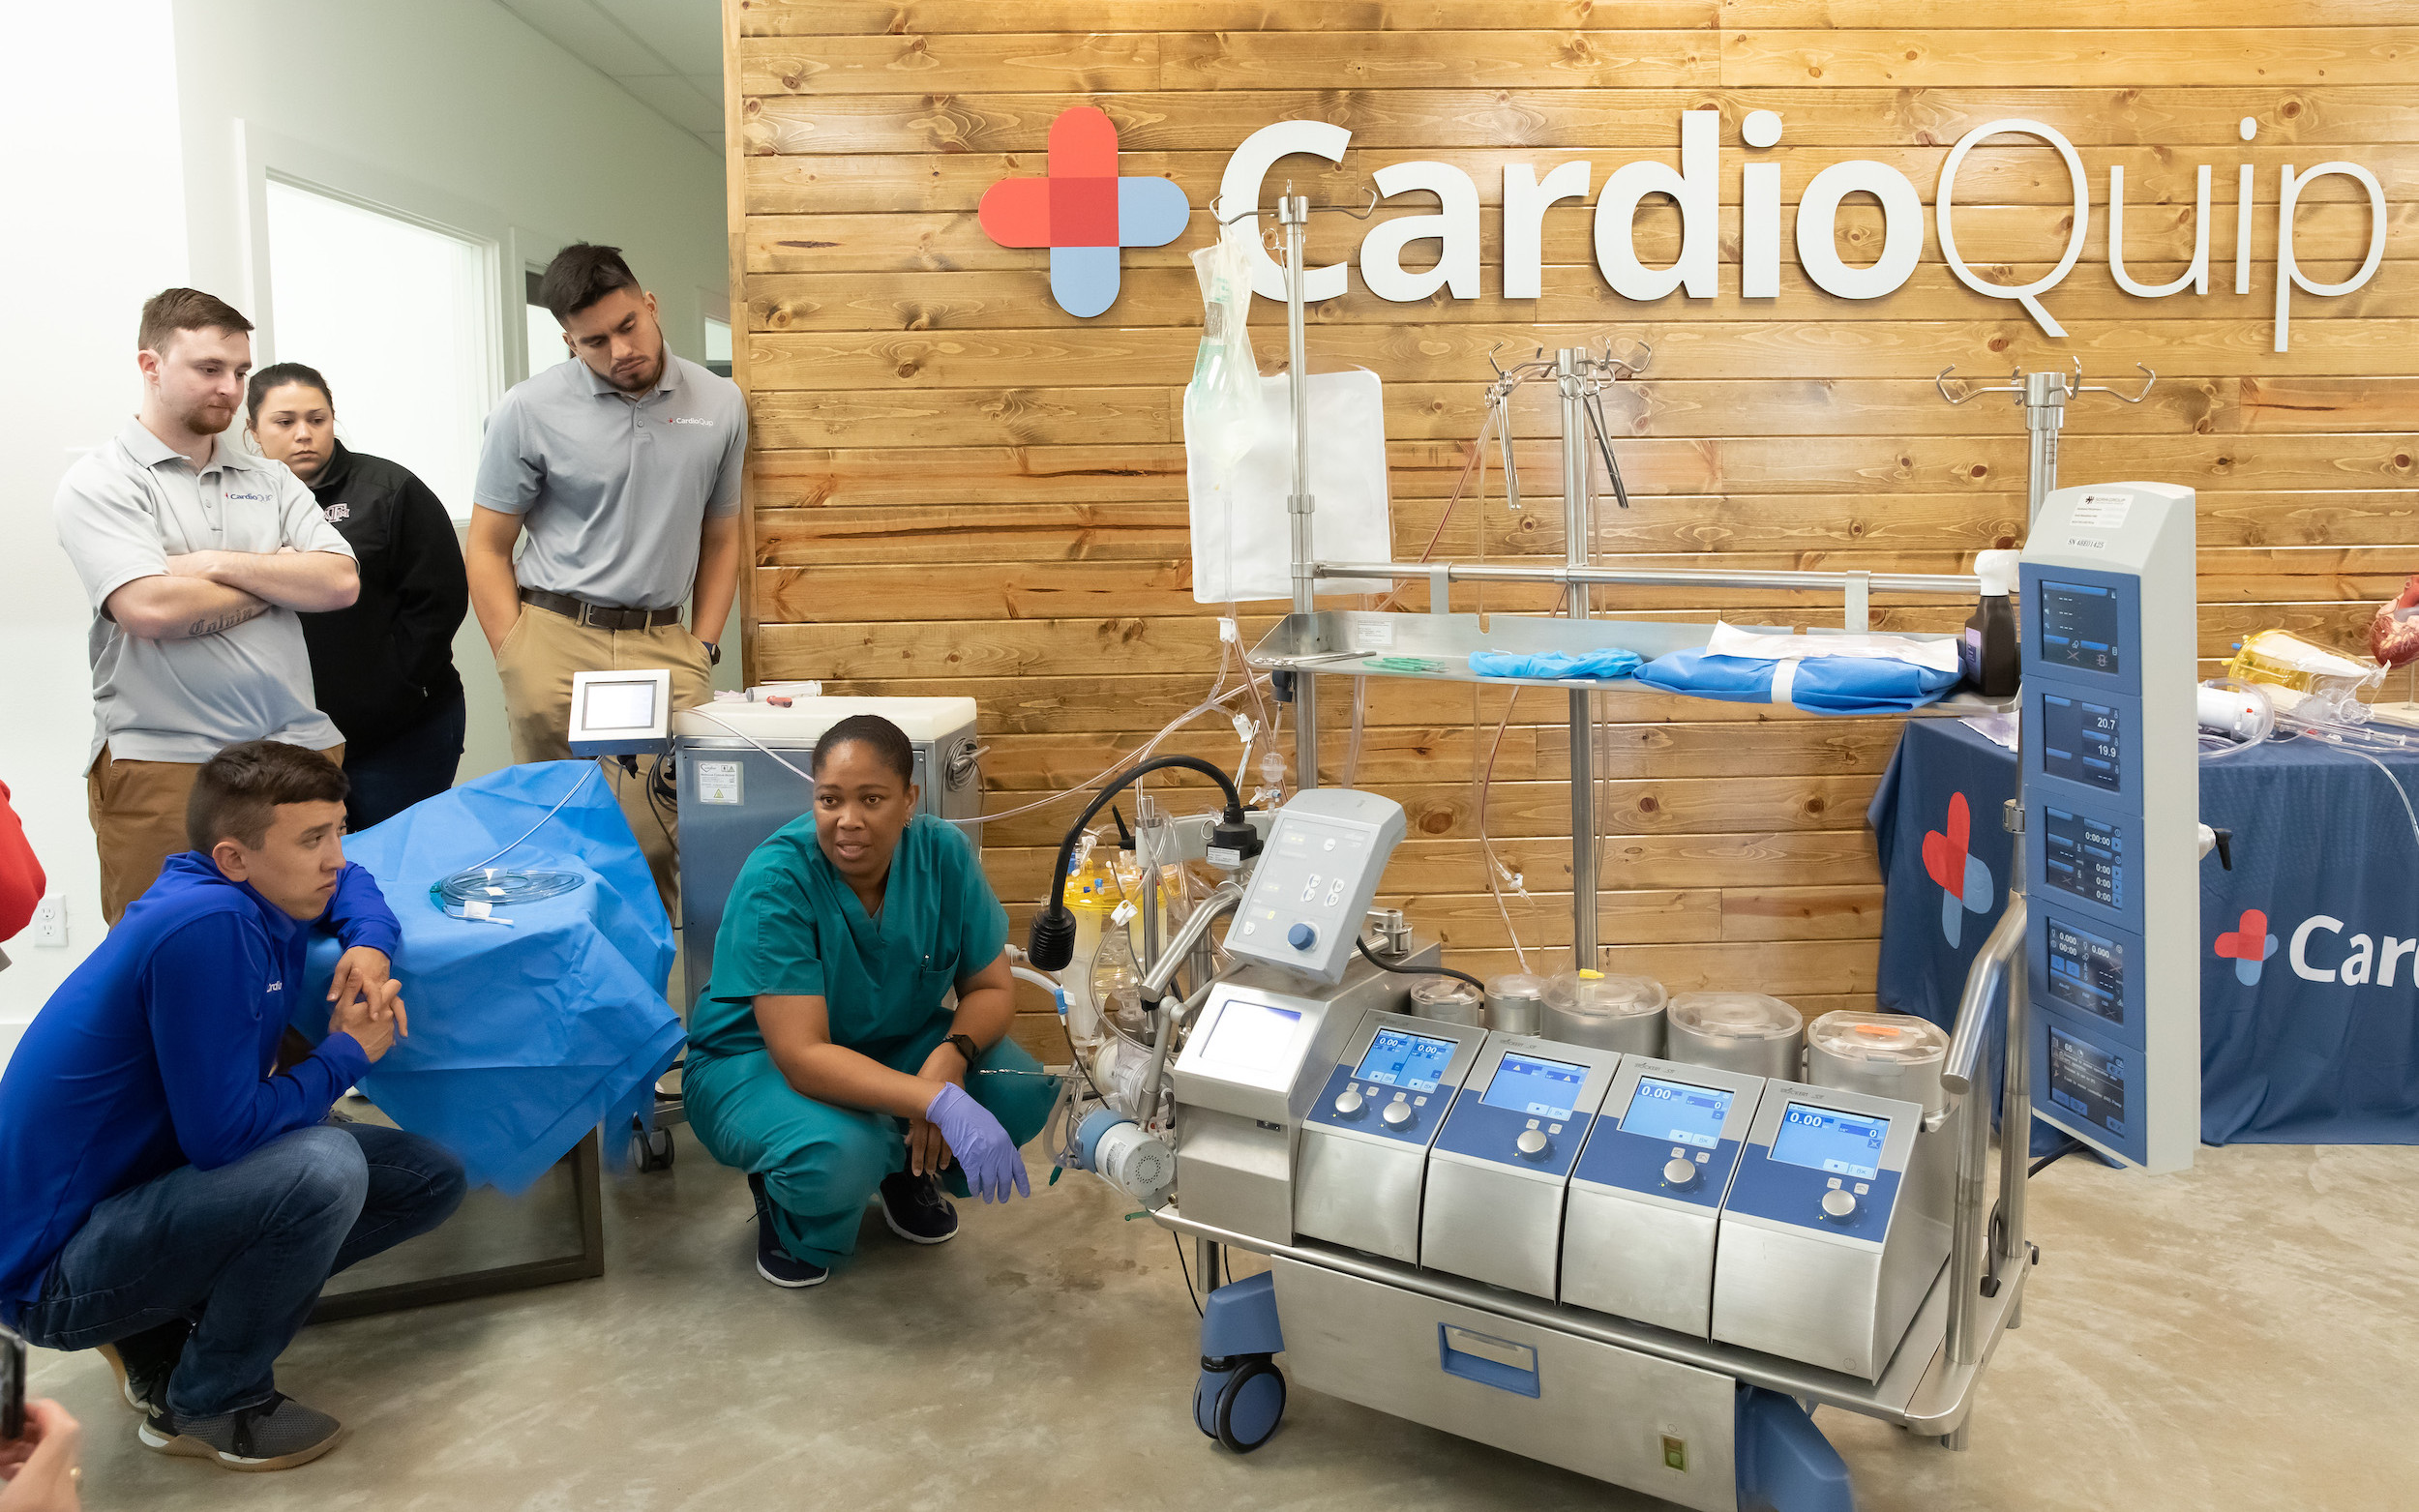 CardioQuip employee showing how their machine works